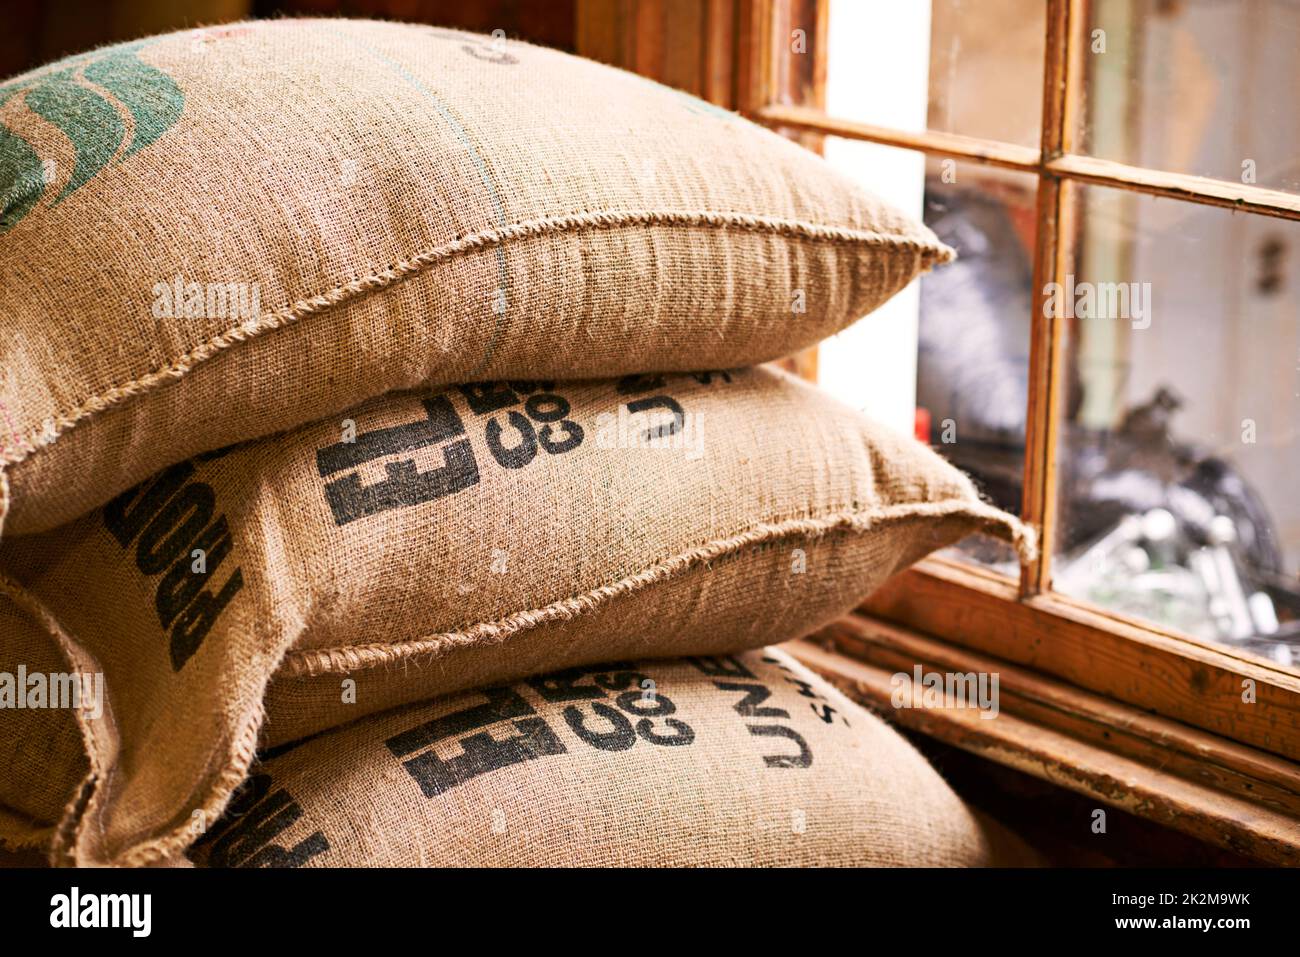 The essence of the coffee industry. Shot of a burlap sack full of unprocessed coffee beans. Stock Photo